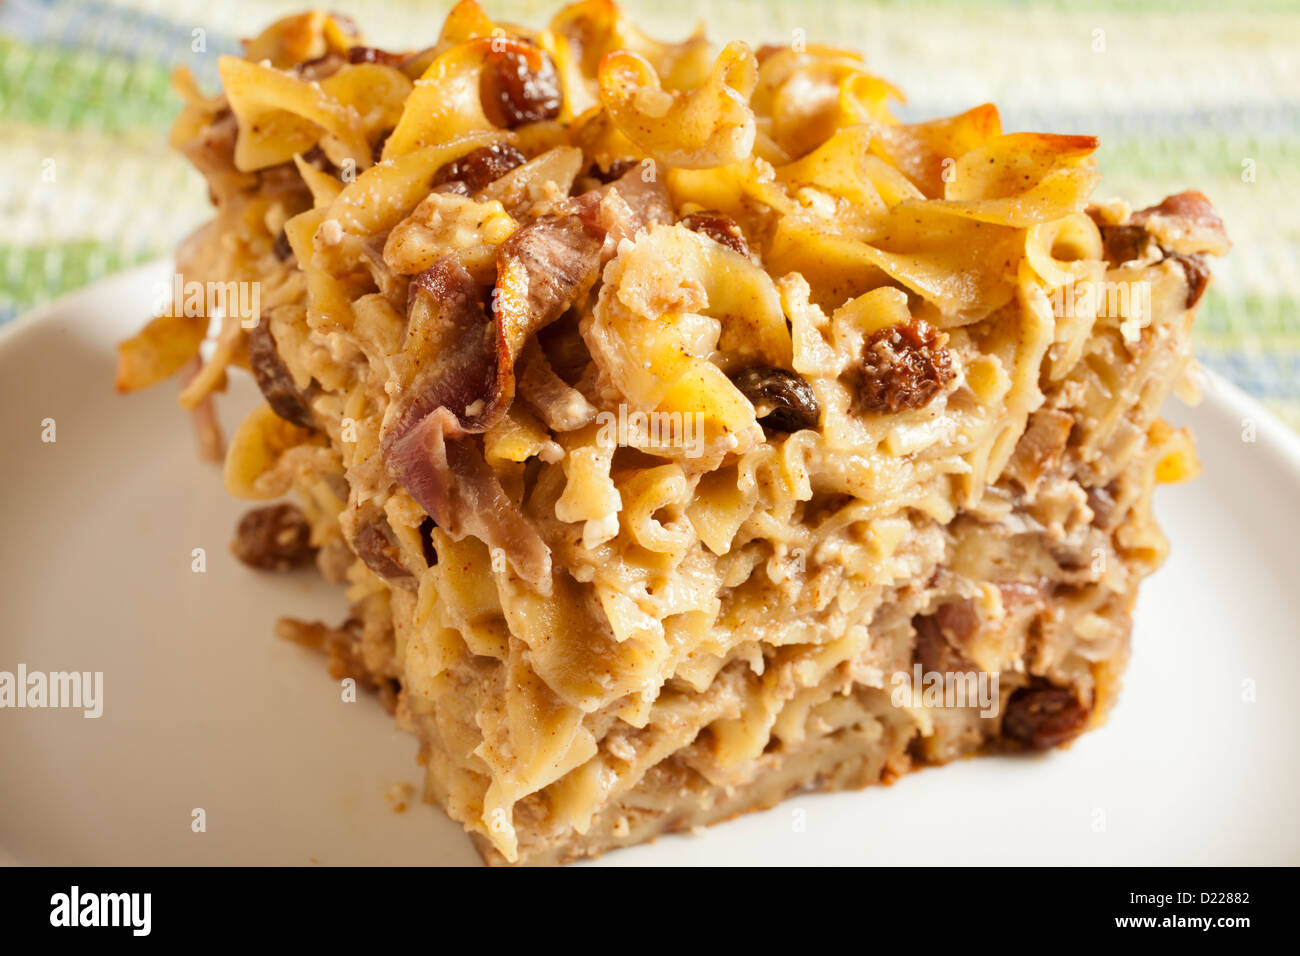 Noodle kugel, a pudding from the Eastern European Jewish tradition Stock Photo